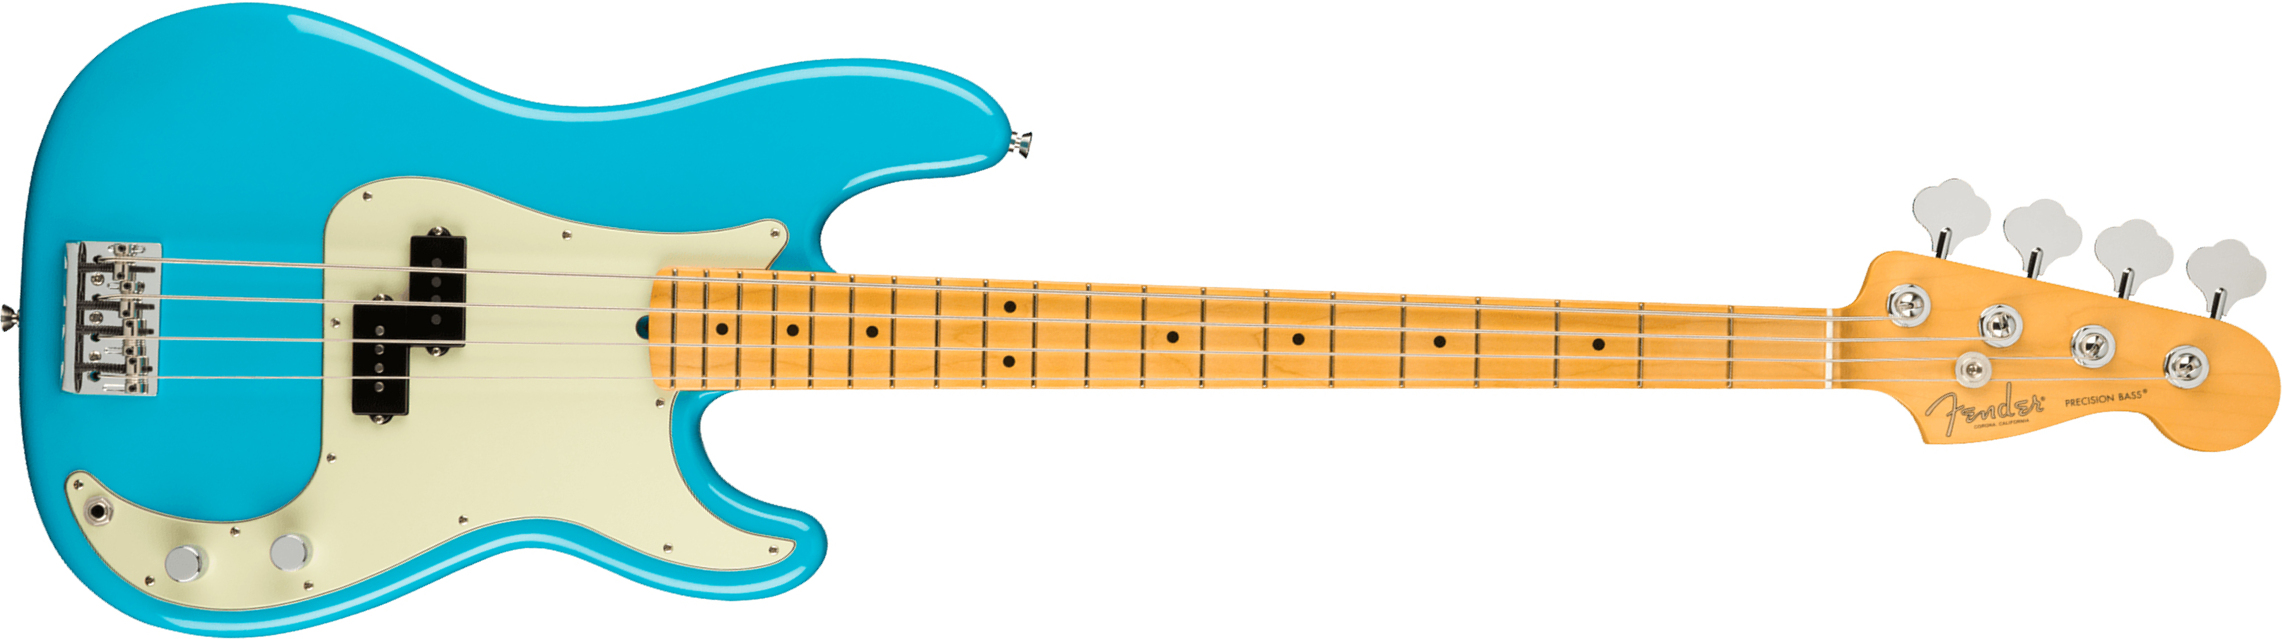 Fender Precision Bass American Professional Ii Usa Mn - Miami Blue - Basse Électrique Solid Body - Main picture